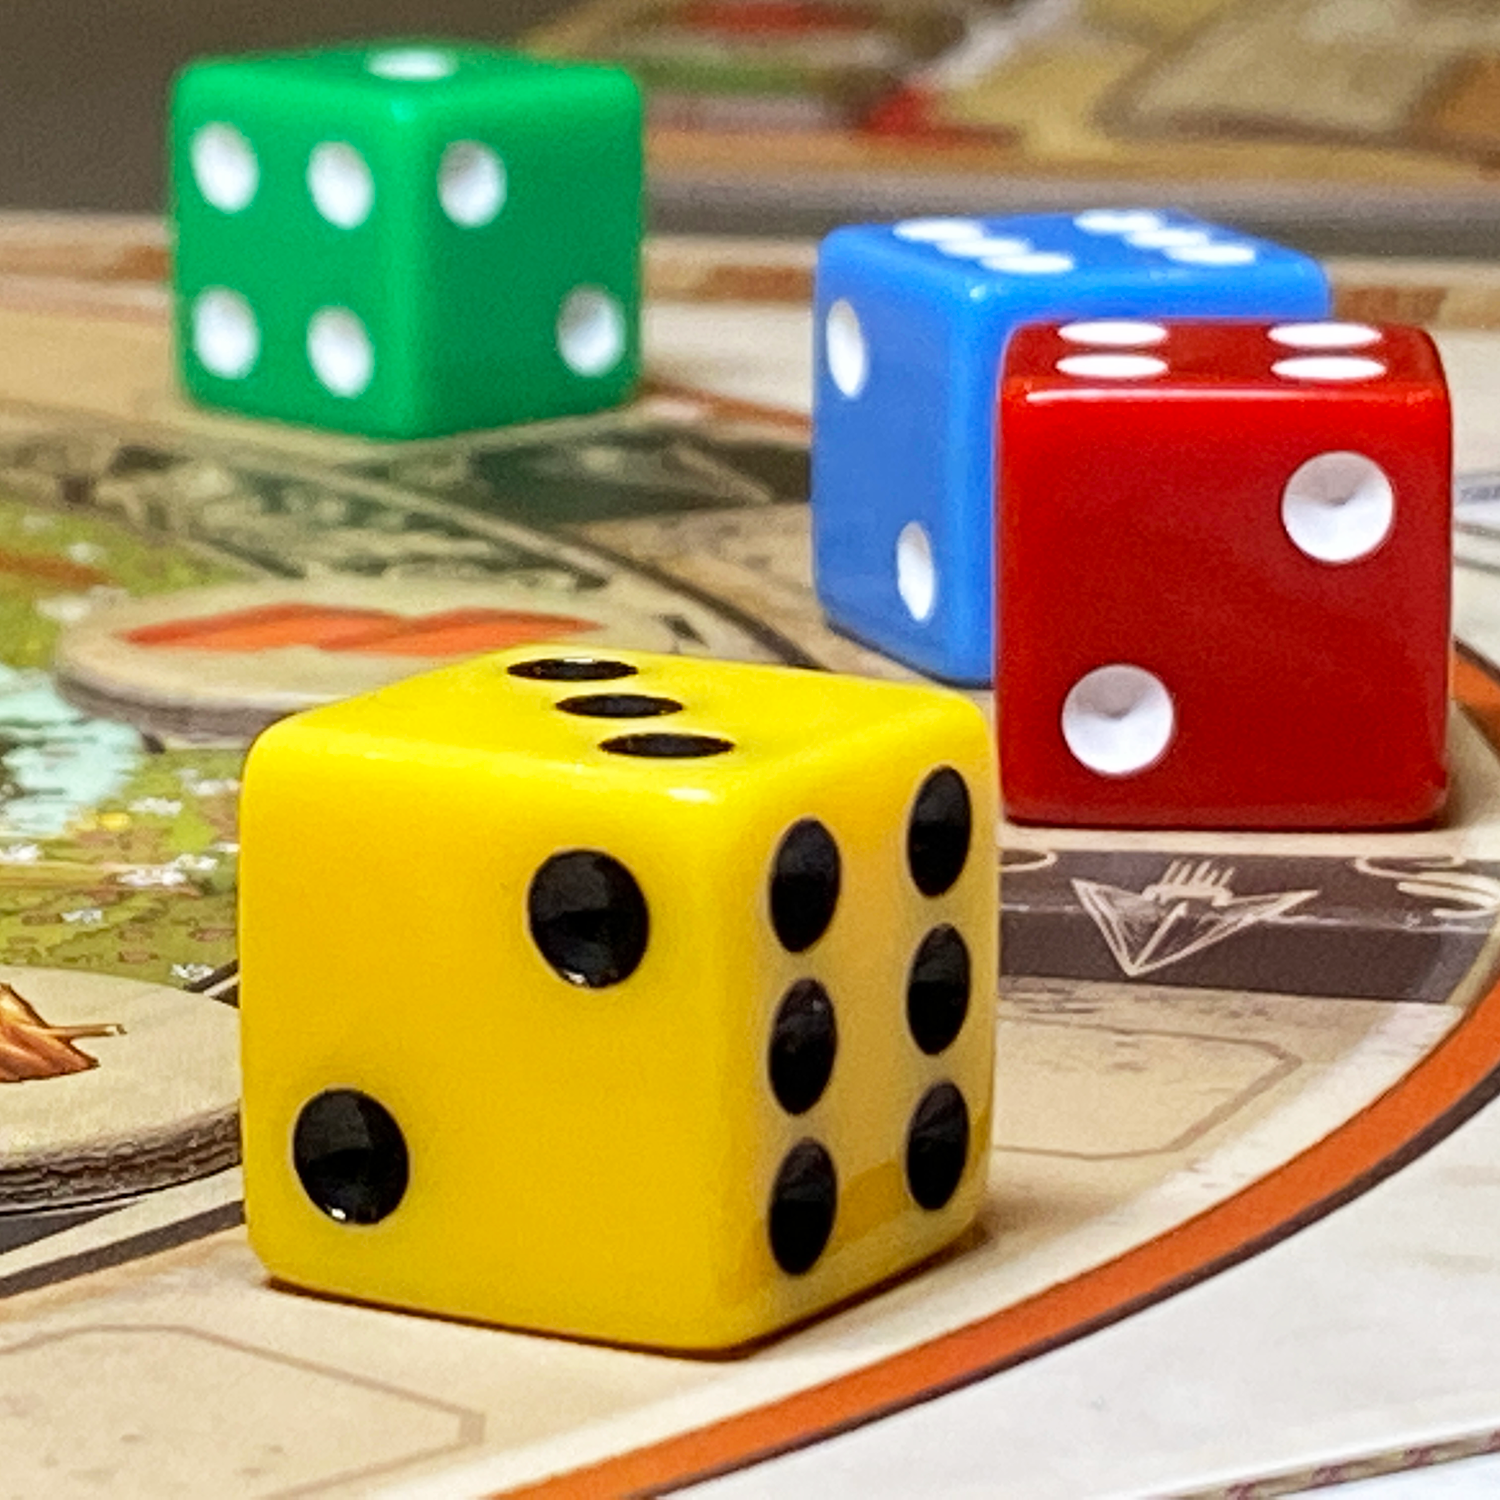 The Red Cathedral Dice